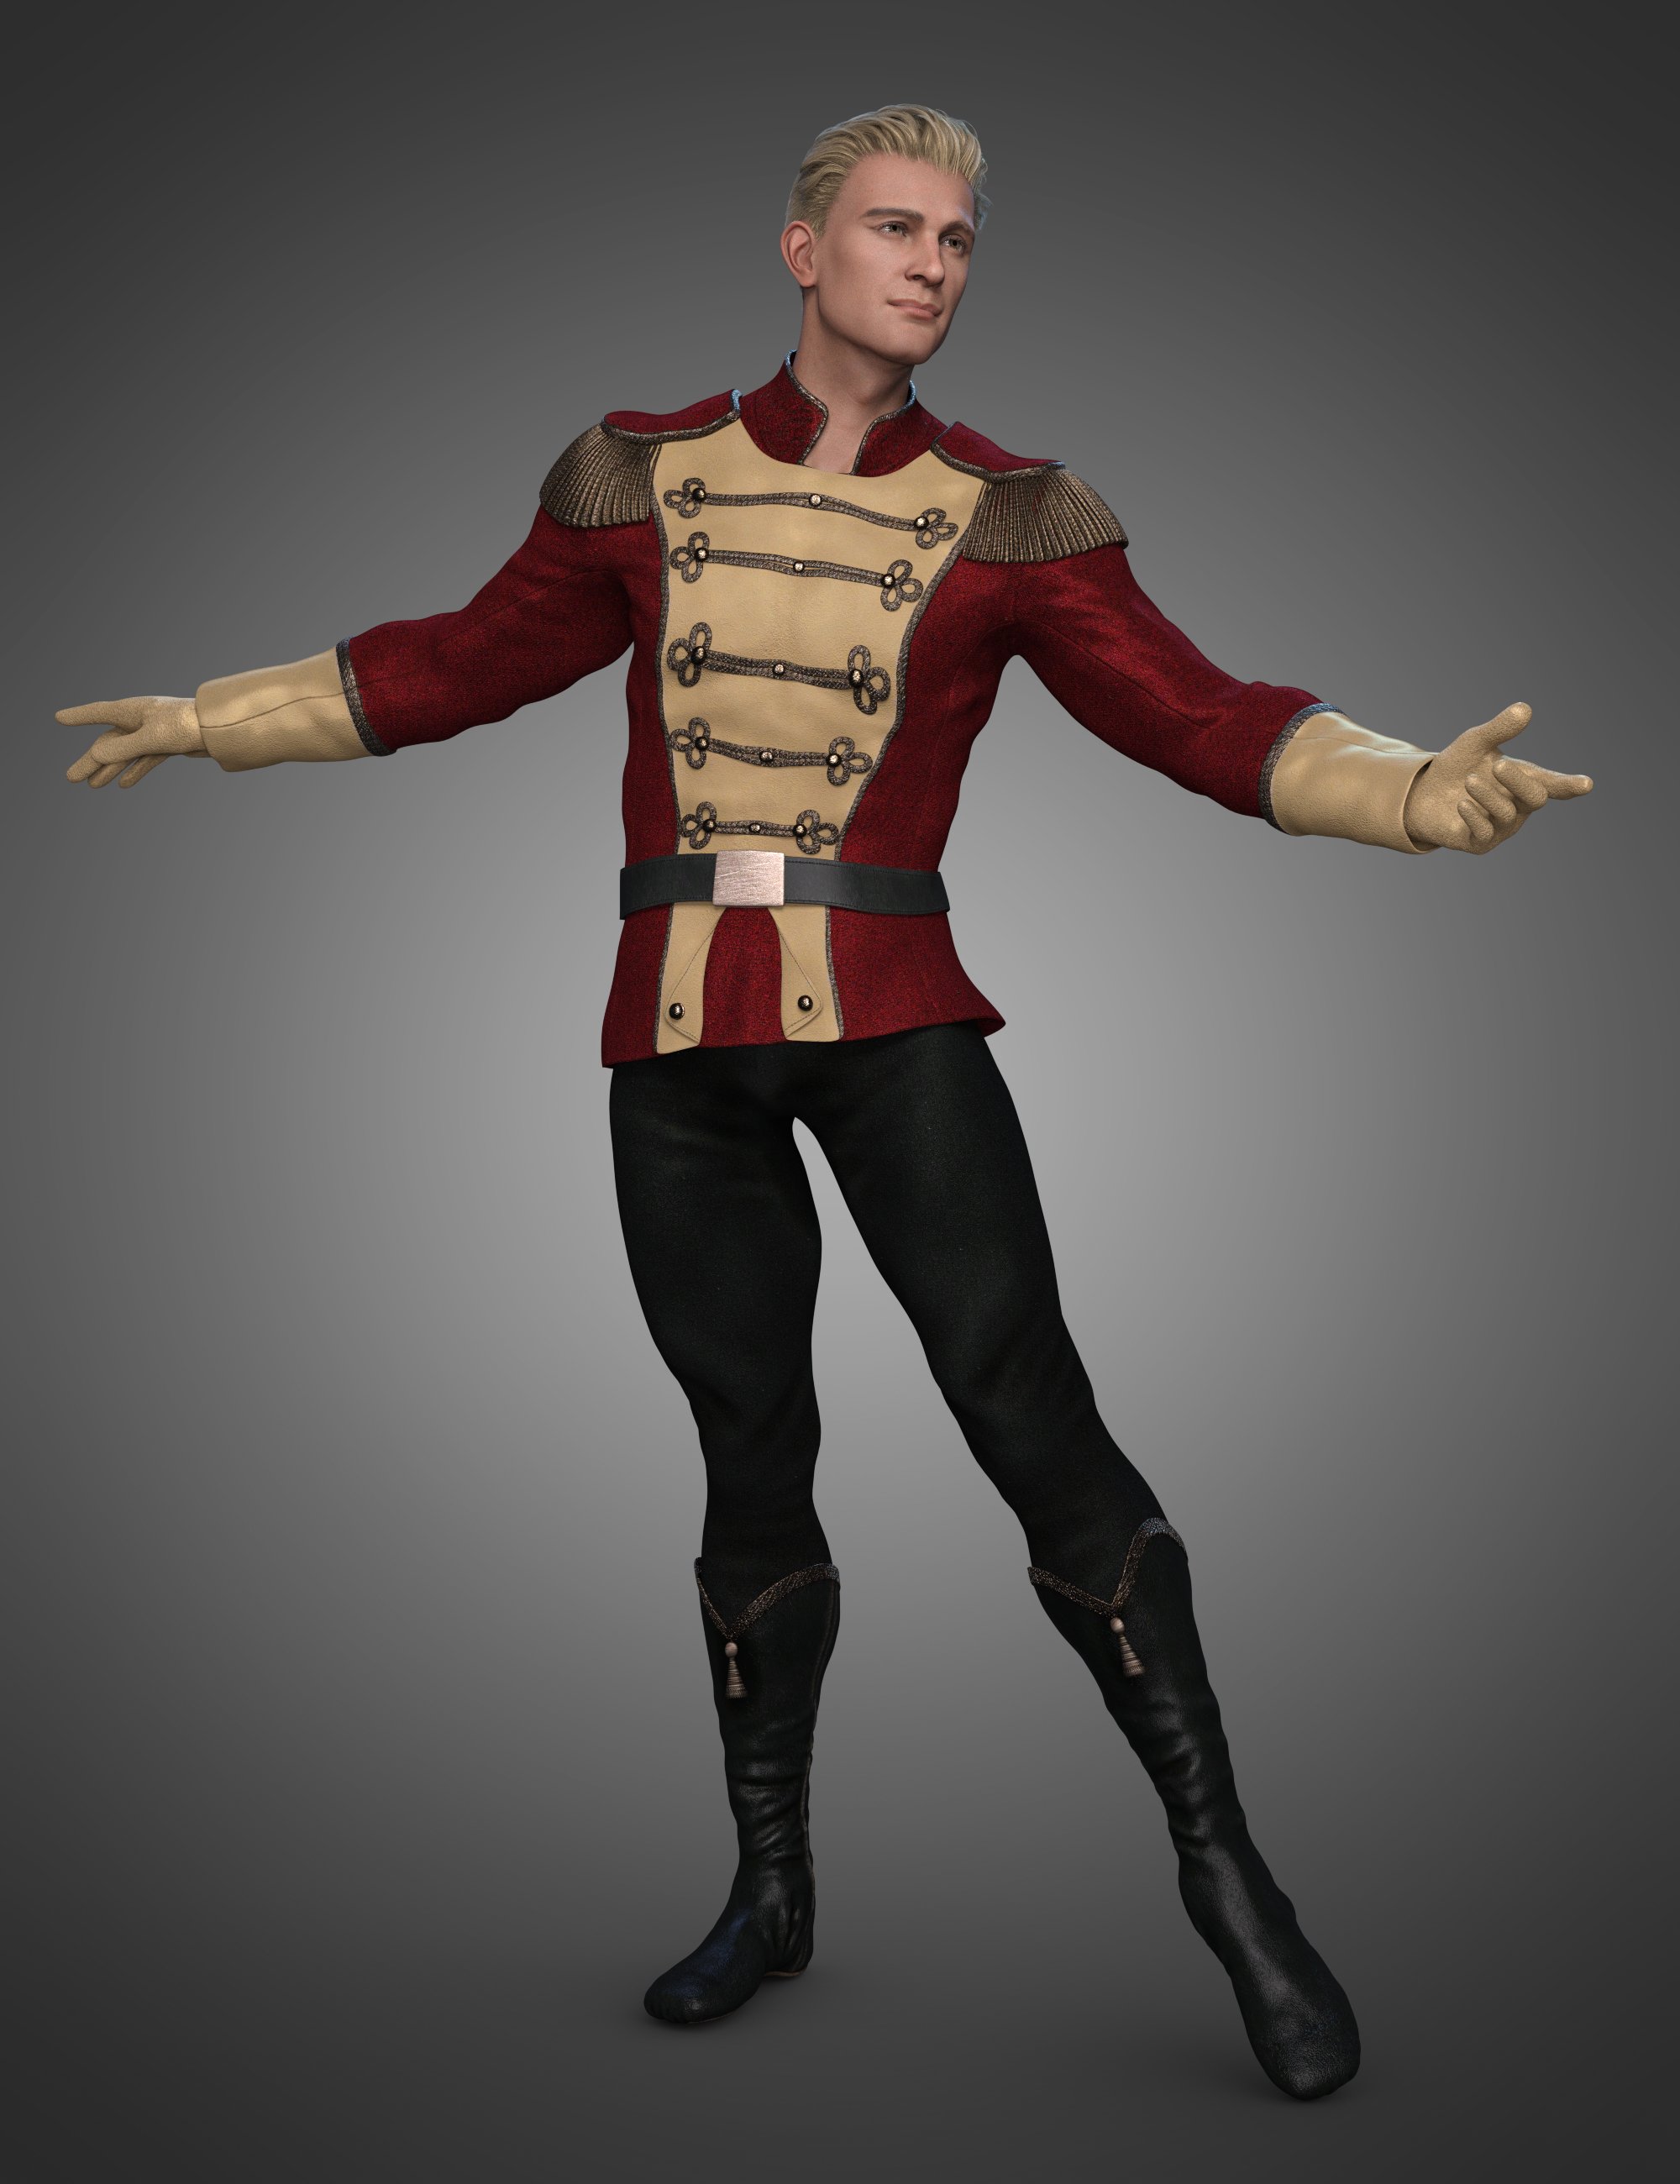 Holiday Ballet Outfit for Genesis 8 and 8.1 Males